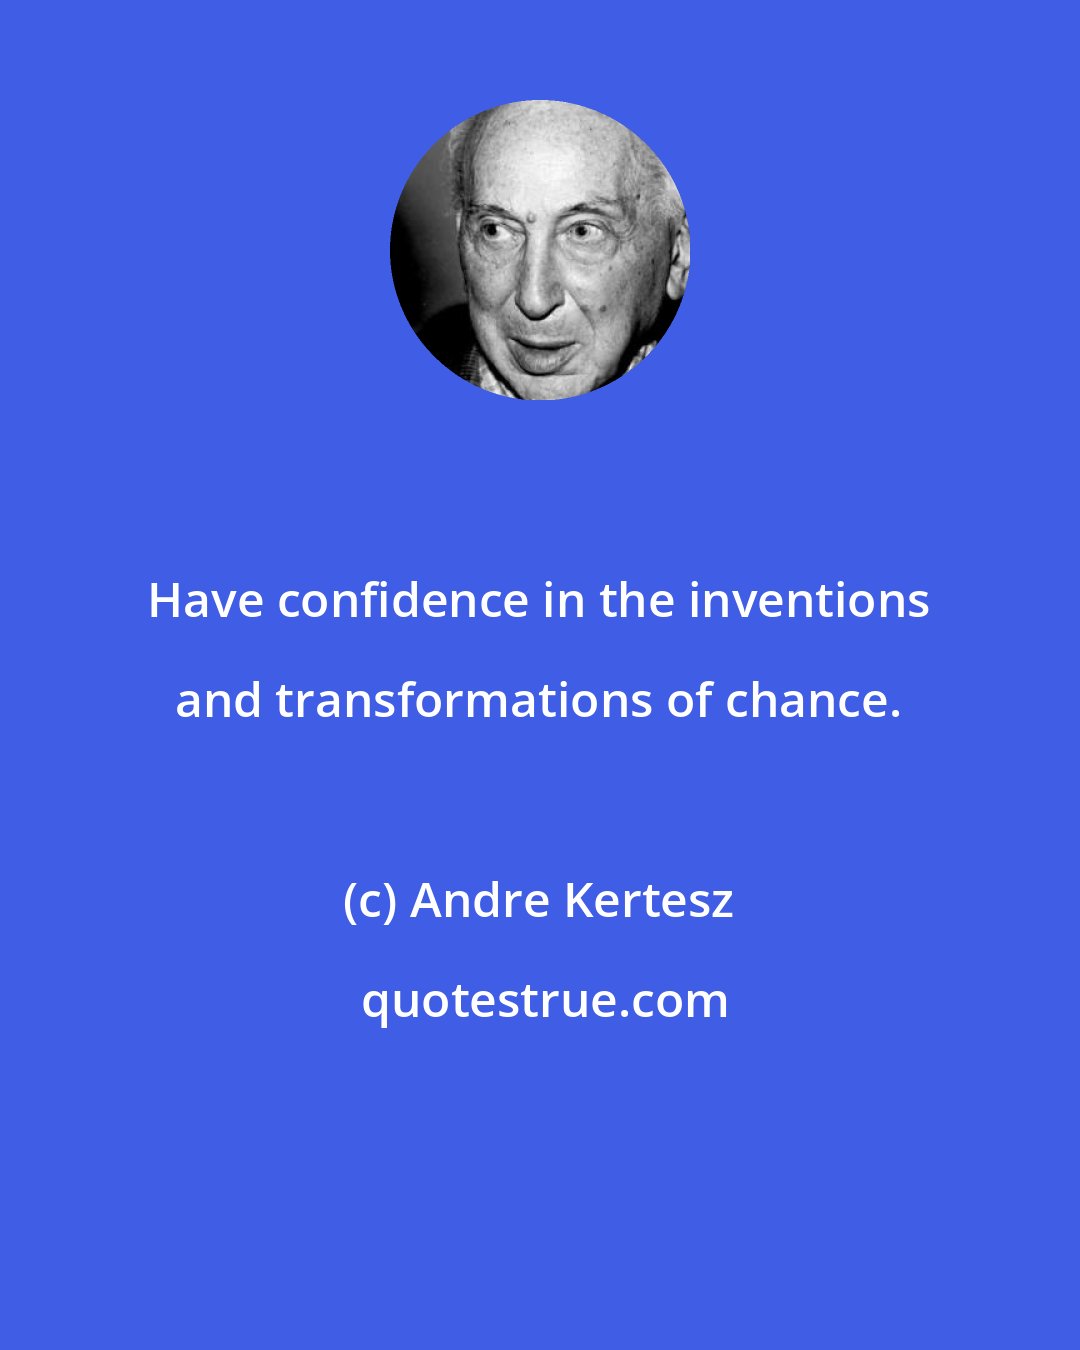 Andre Kertesz: Have confidence in the inventions and transformations of chance.